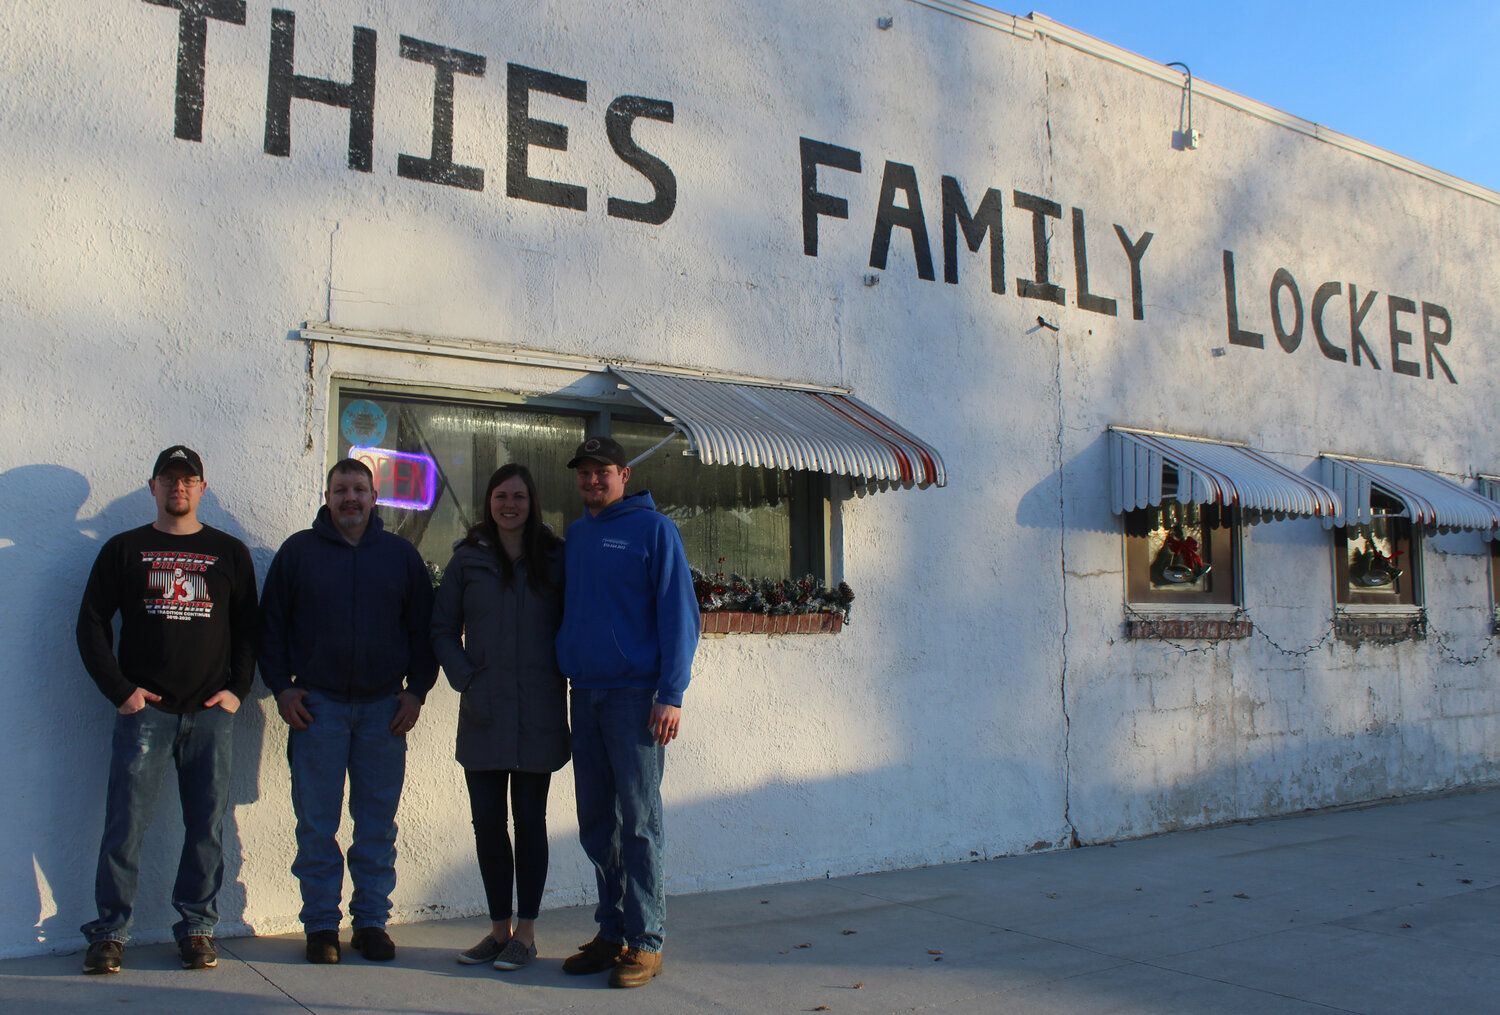 The Thies family includes (left) Jesse, John, Ashley and Ethan.